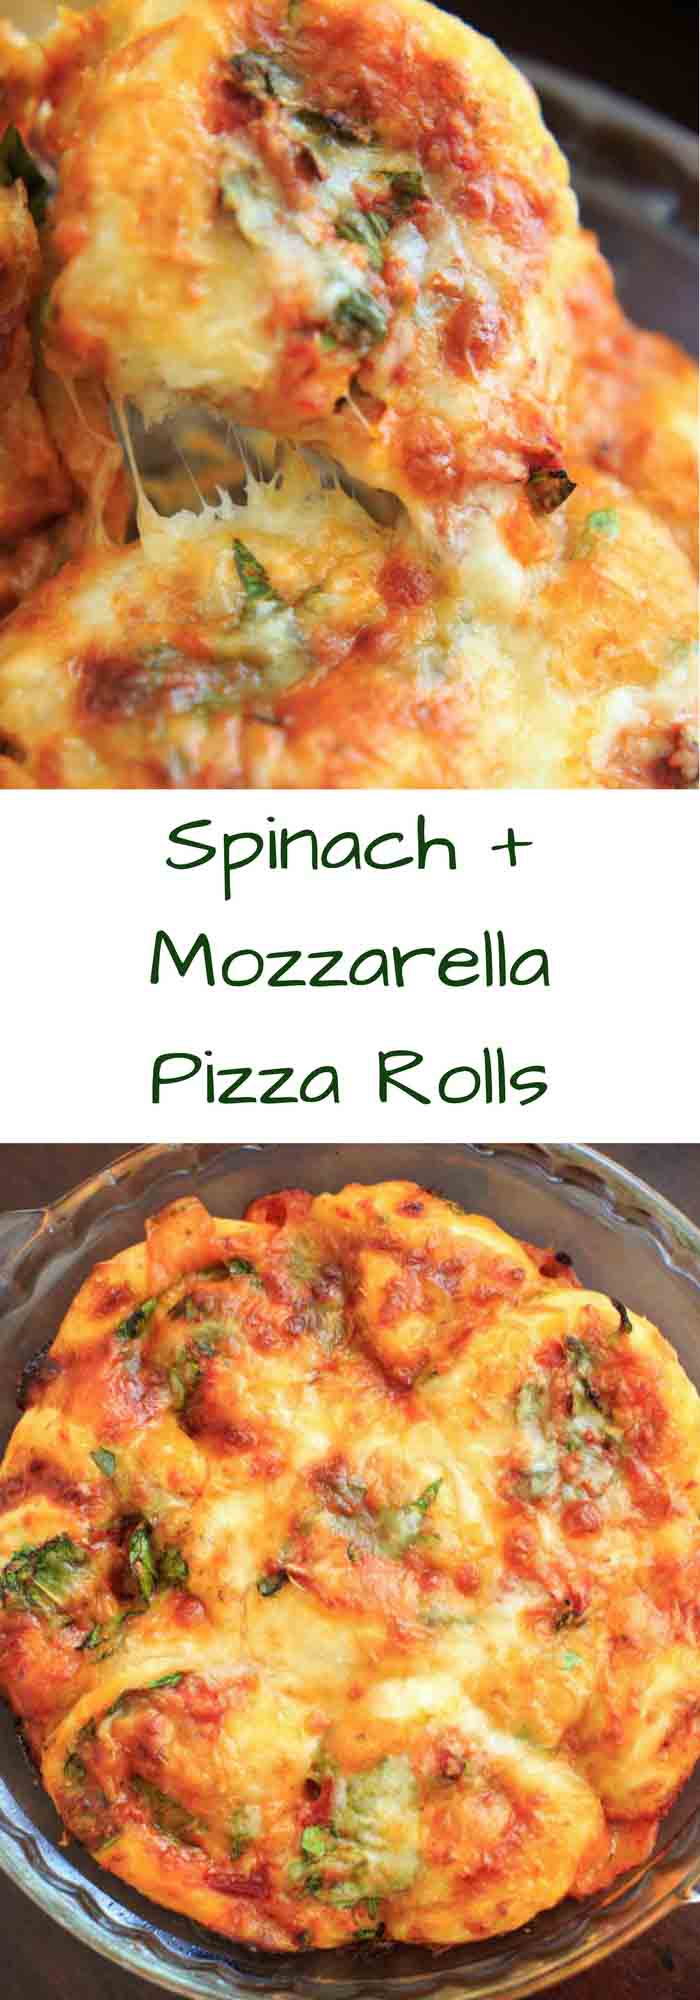 Spinach Mozzarella Pizza Rolls - game-time appetizer or family dinner